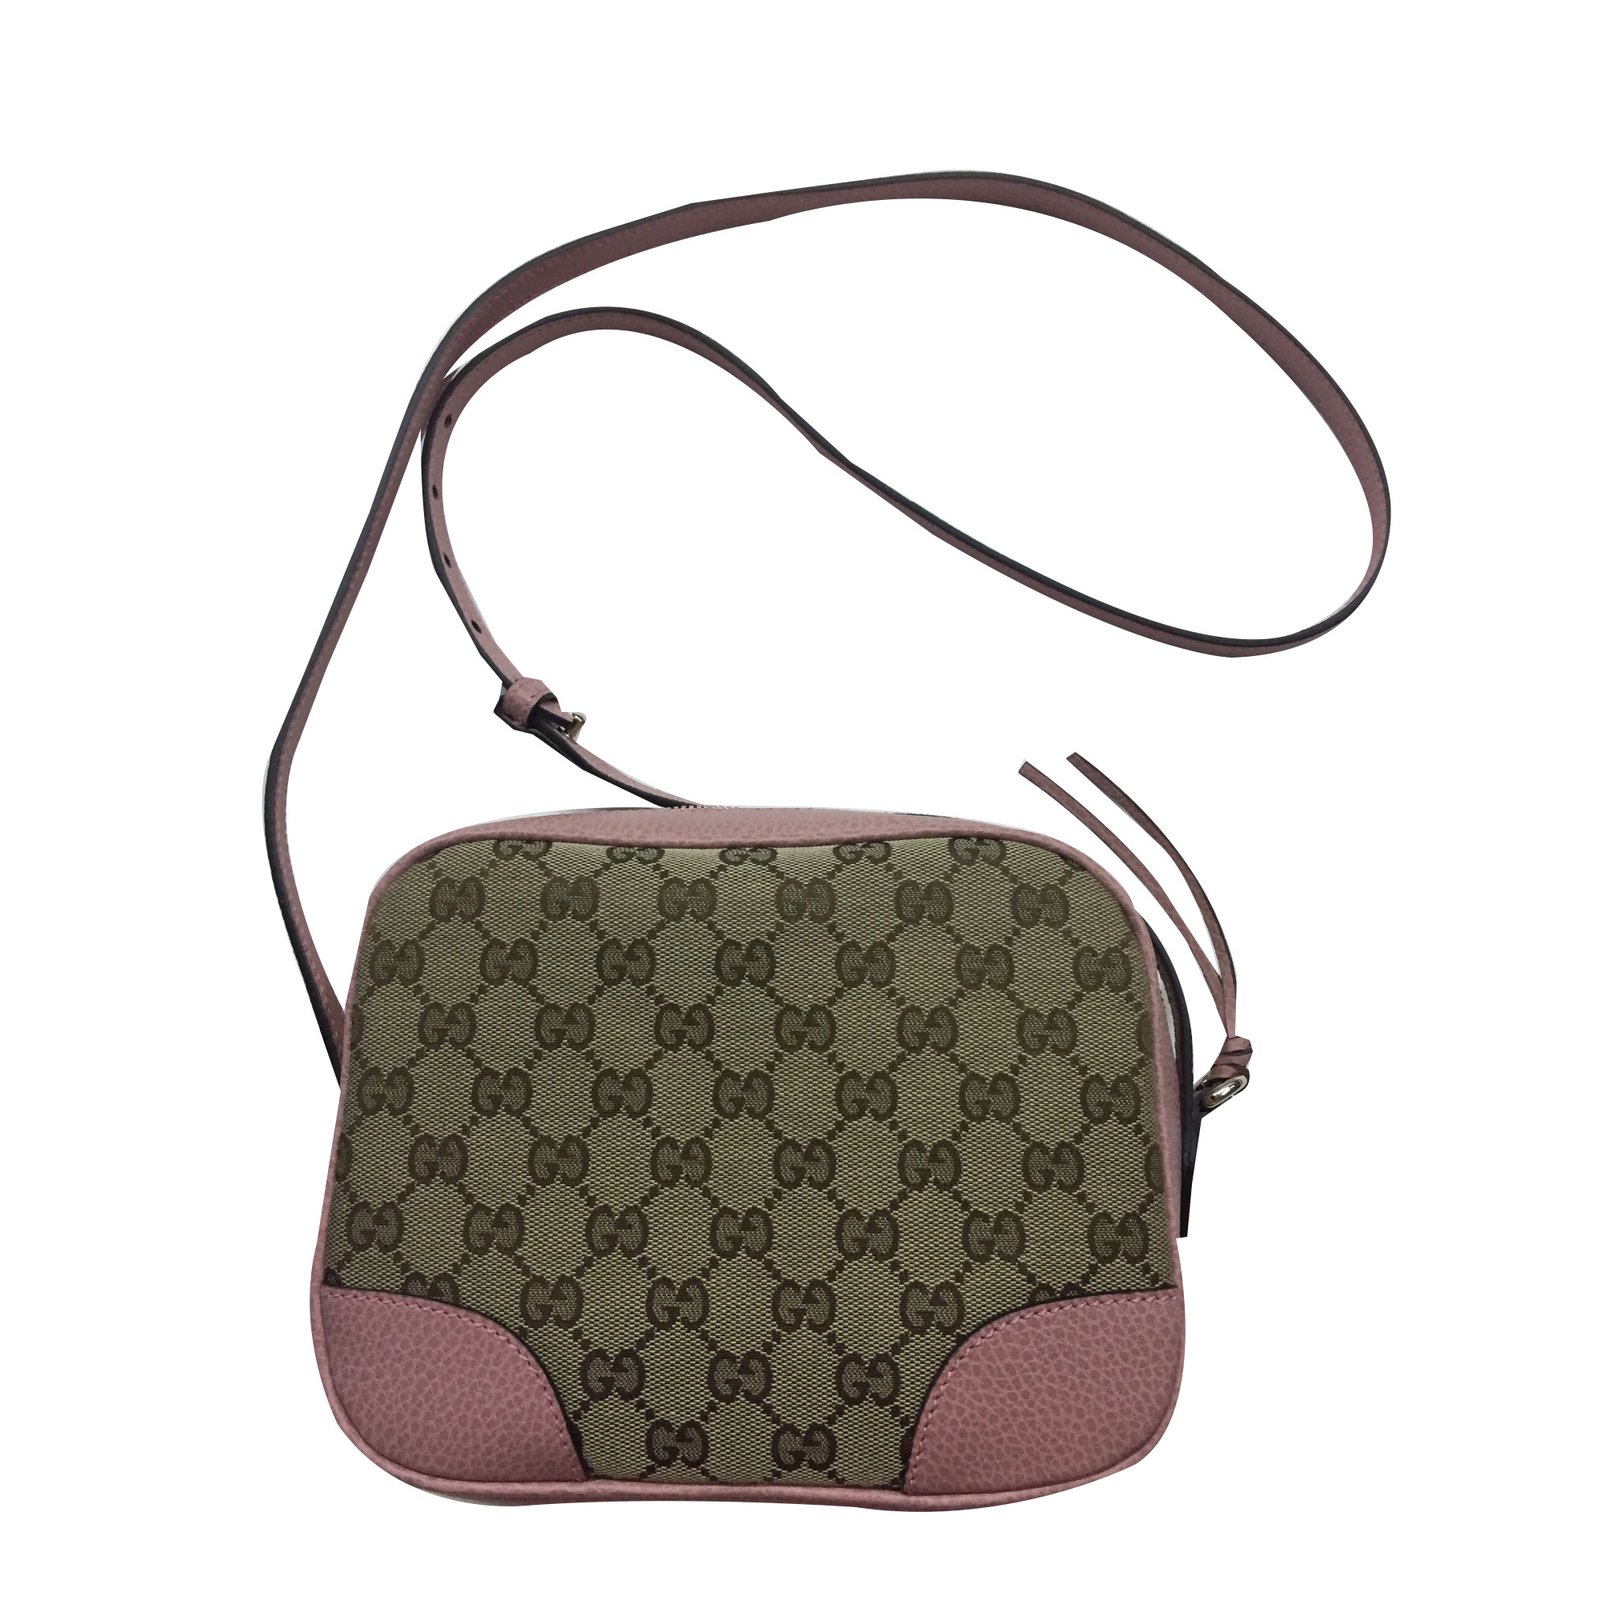 Gucci Soho Disco Bag In Light Pink | Confederated Tribes of the Umatilla Indian Reservation